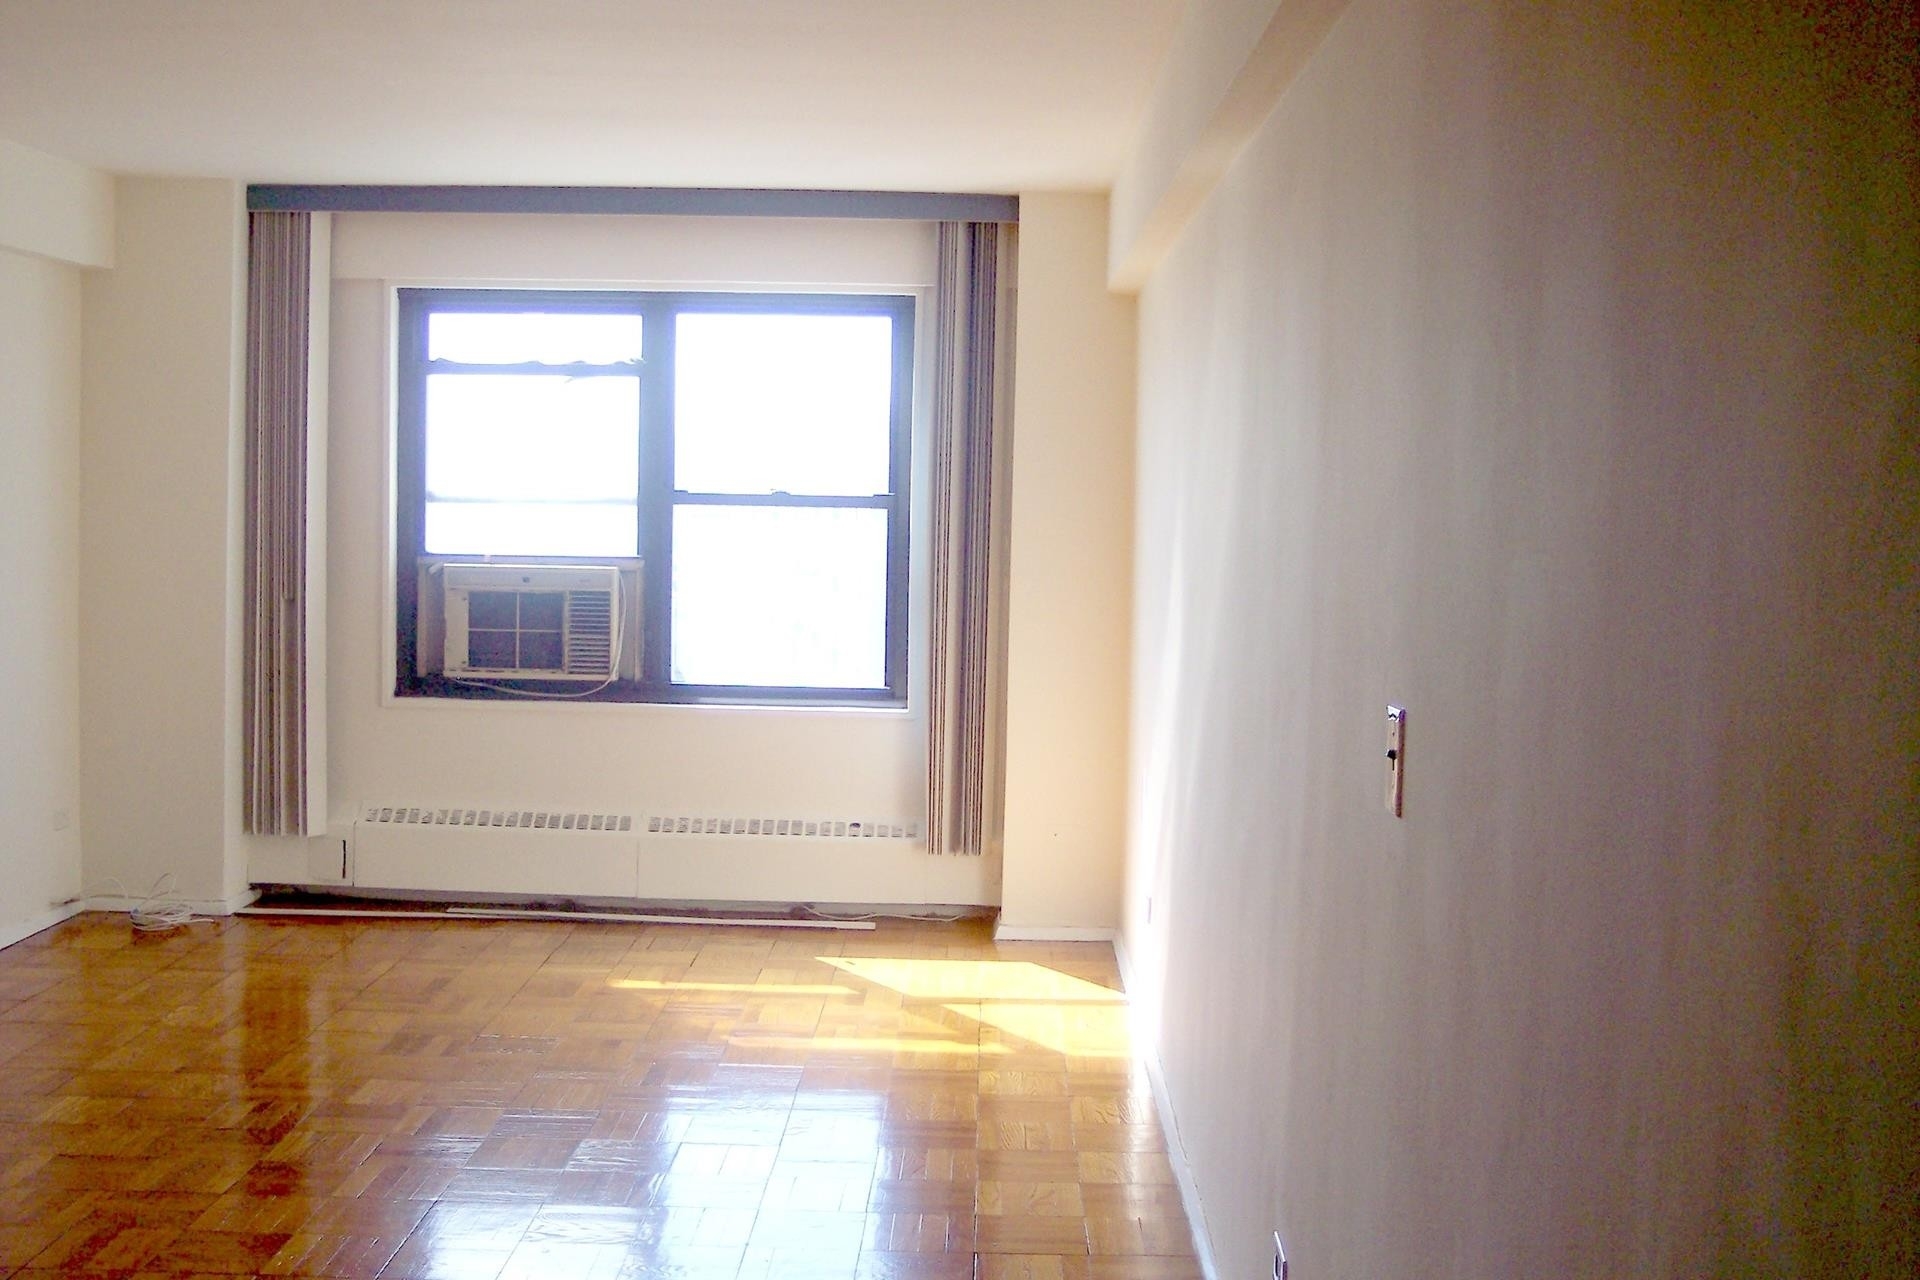 3. Co-op Properties at 345 West 145th St, 6B3 New York